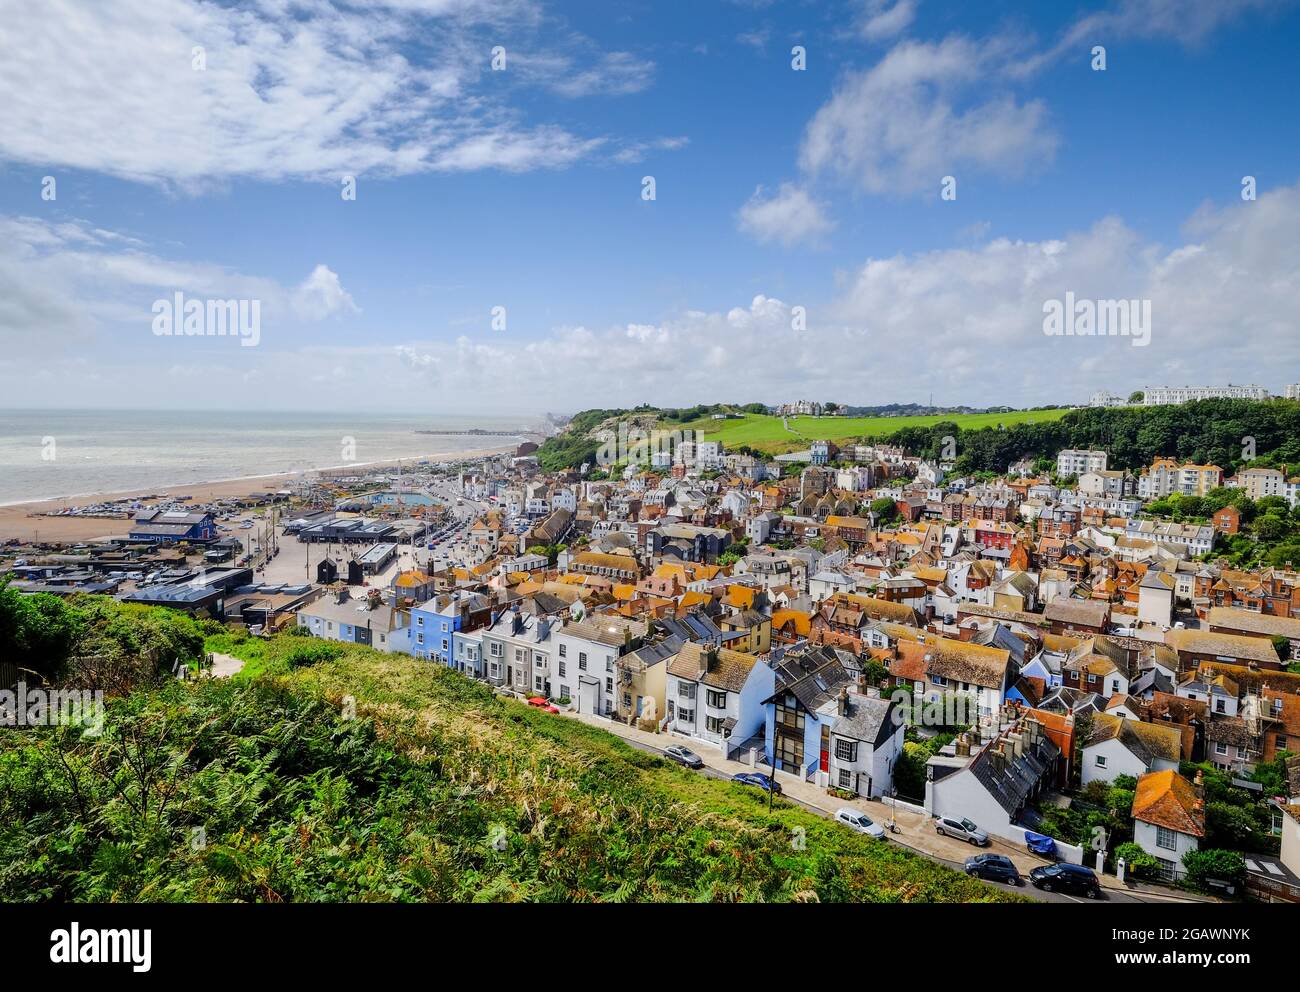 Hastings Old Town, Hastings, Sussex, Royaume-Uni Banque D'Images